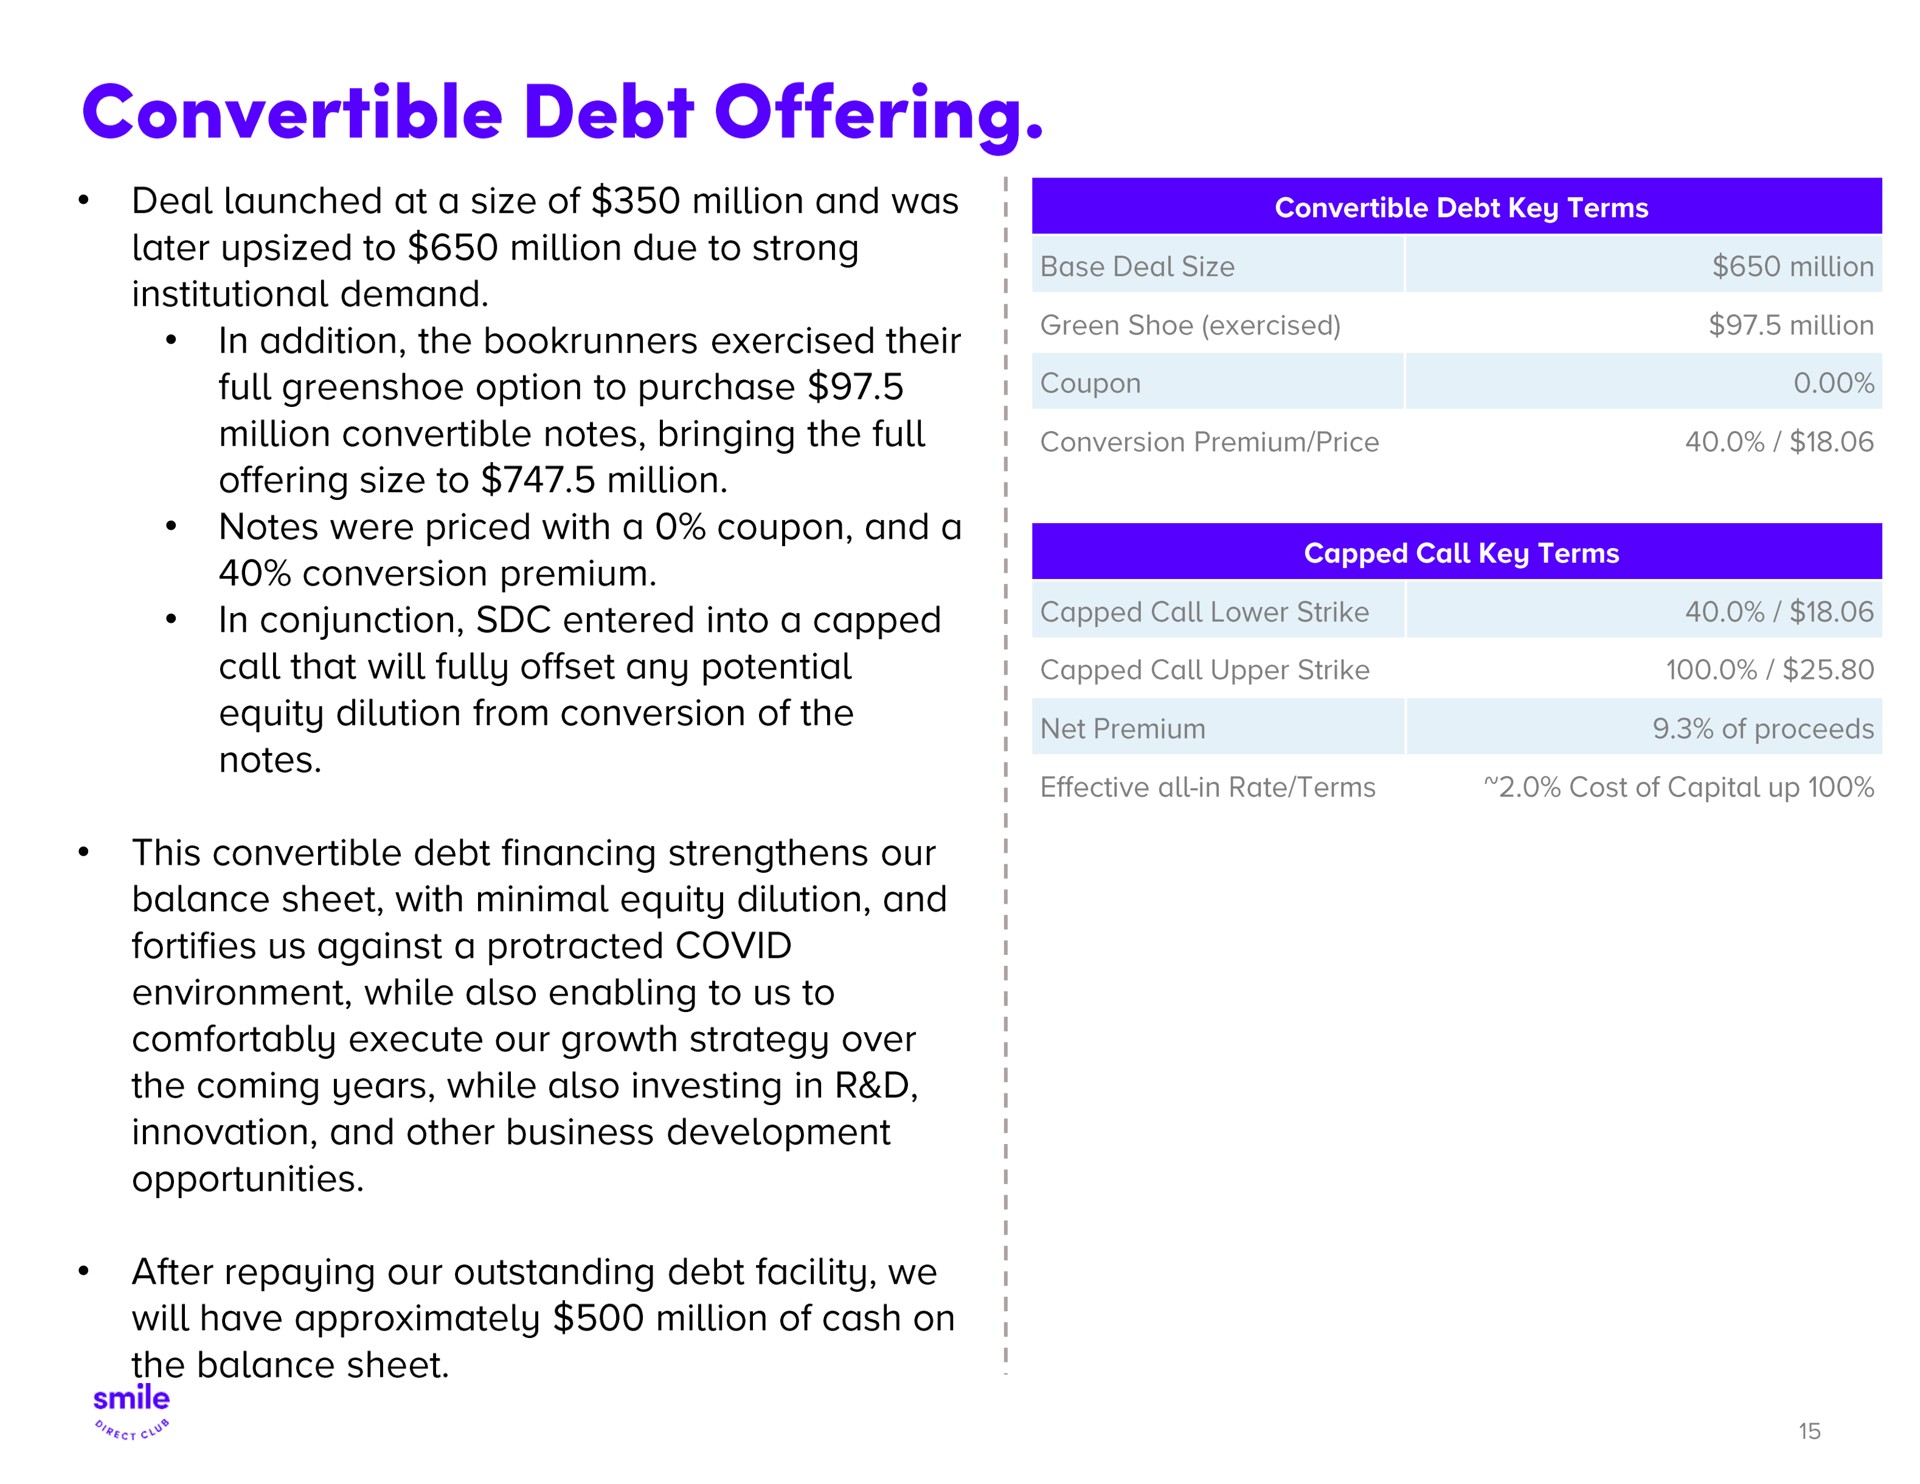 soe convertible debt offering deal launched at a size of million and was in conjunction entered into a capped | SmileDirectClub